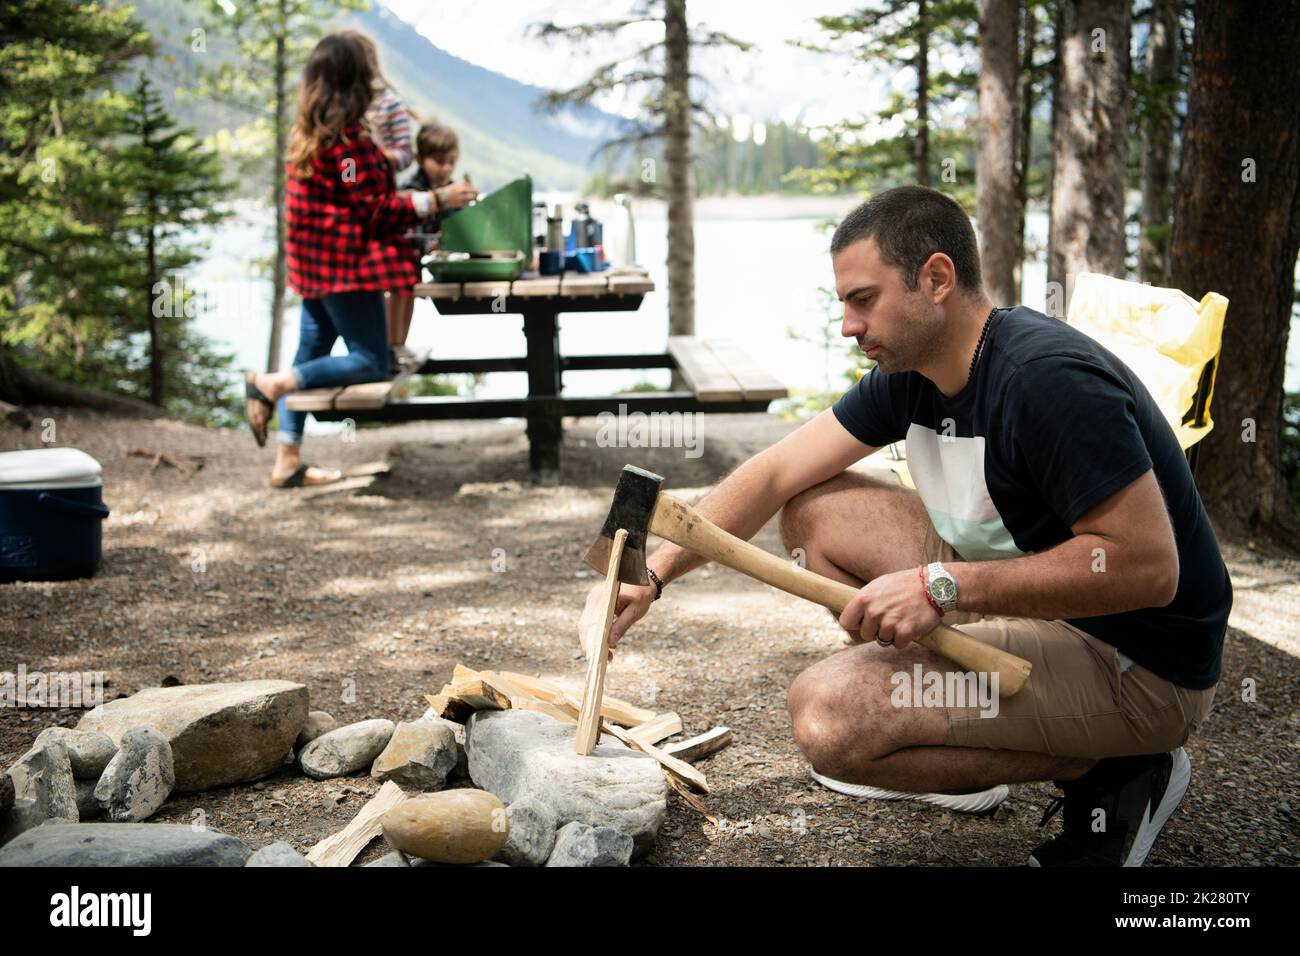 Man splitting firewood for campfire at campsite in woods Stock Photo